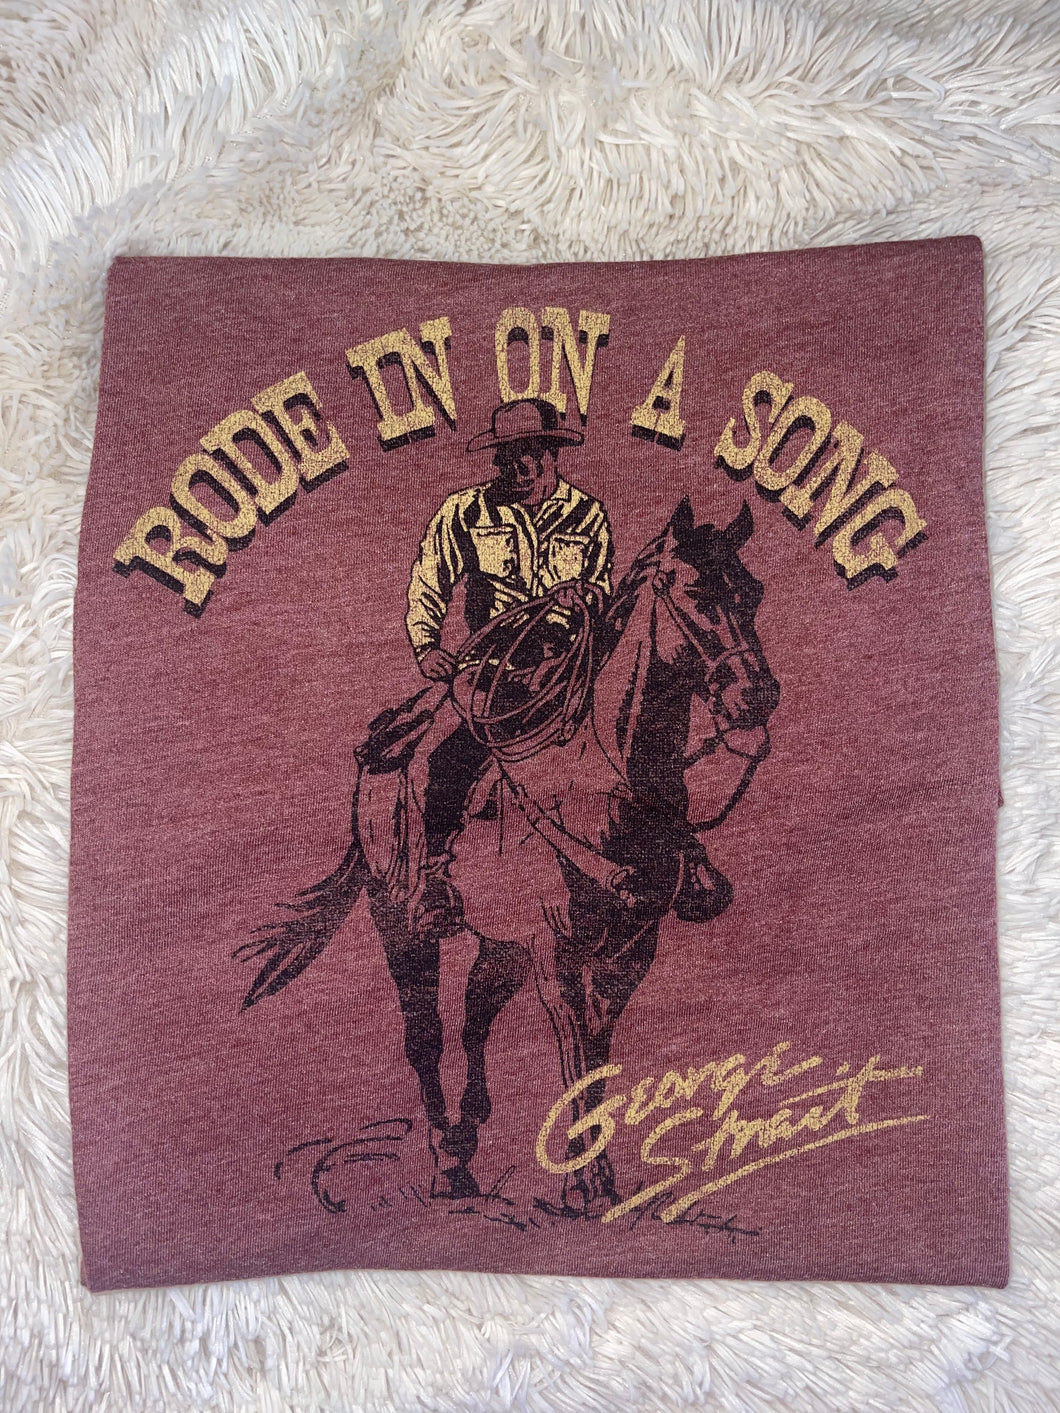 Wrangler Ride In On A Song Tee